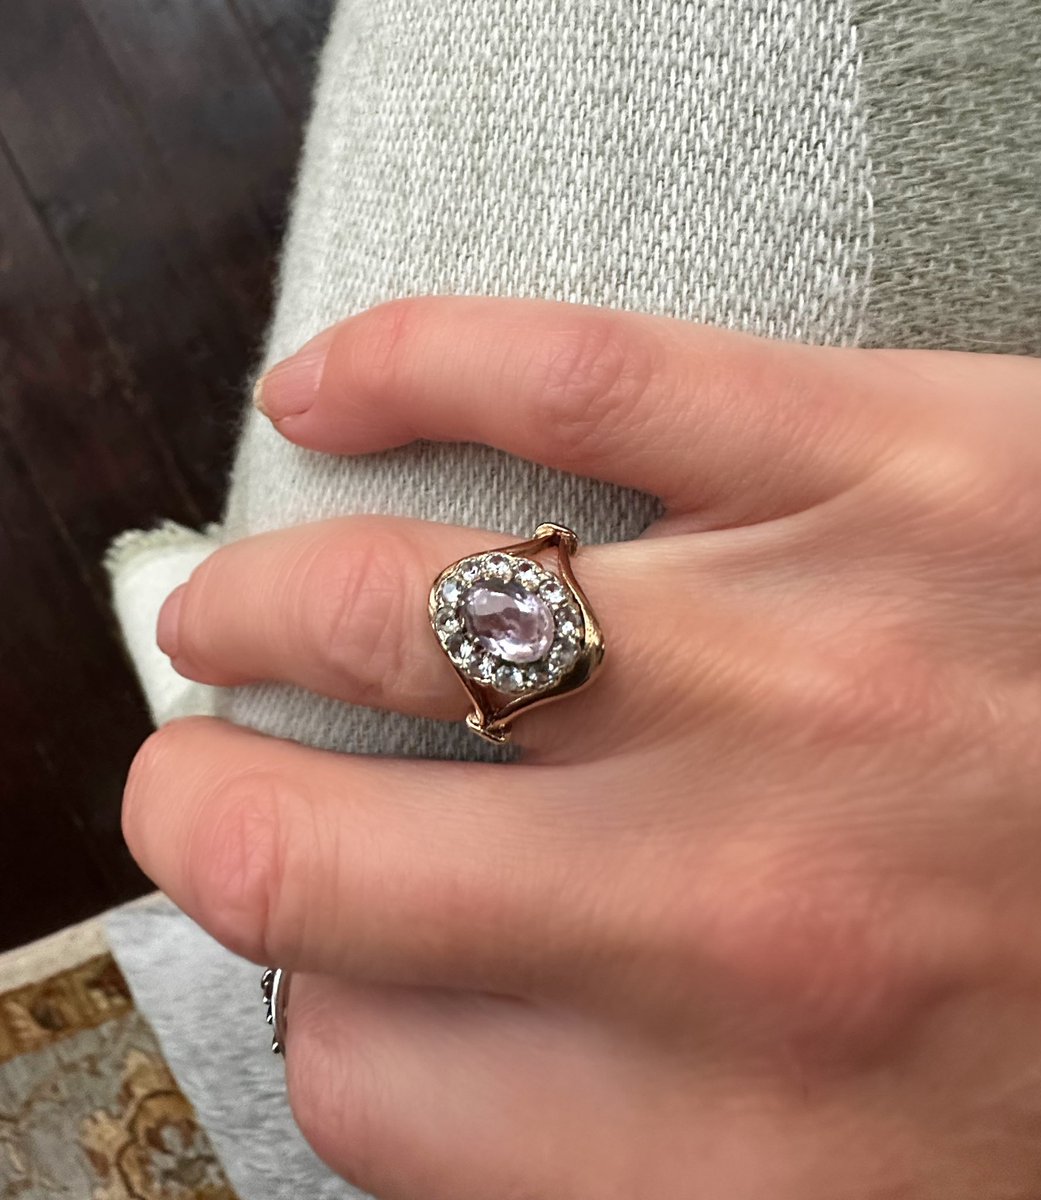 Victorian 9 ct gold ring, set with a pale Amethyst stone & 12 high quality round cut Diamonds, hallmarked for Birmingham 1897. For sale £415.00
romyjeanvandp.etsy.com/listing/159433…
#vintagejewellery #antiquejewelleryforsale #victoriandiamondring  #victorianring #antiqueamethystring